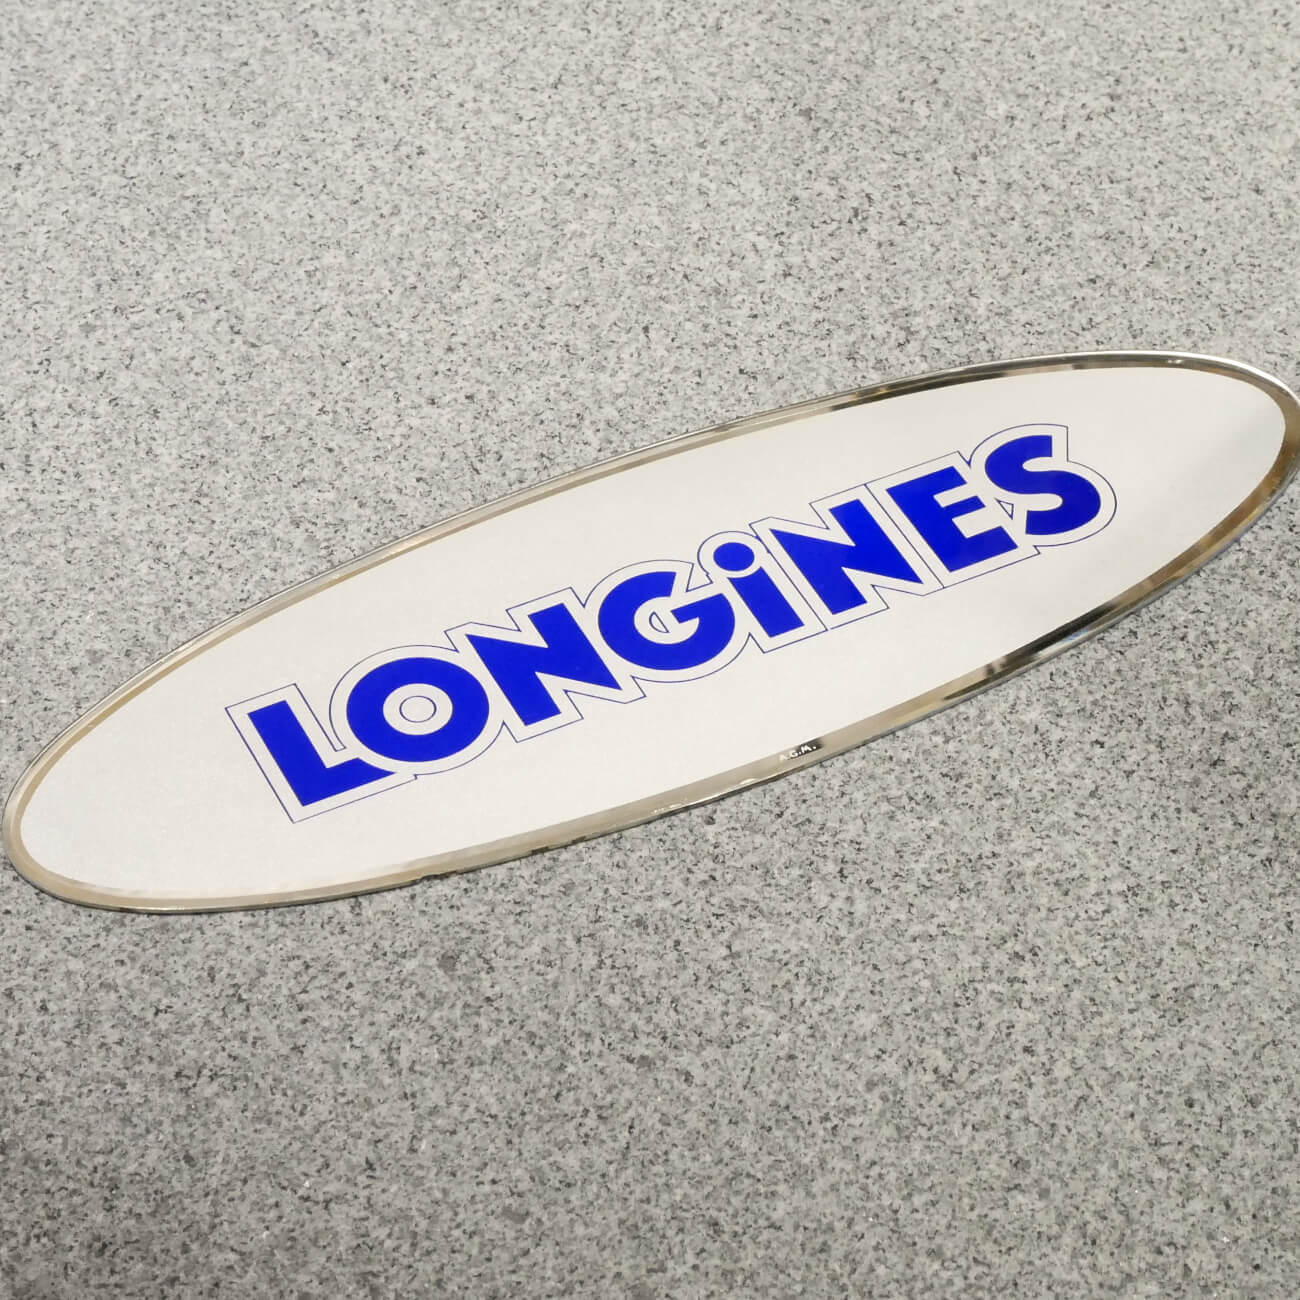 WATCH CASE & OTHER LONGINES SIGN BOARD